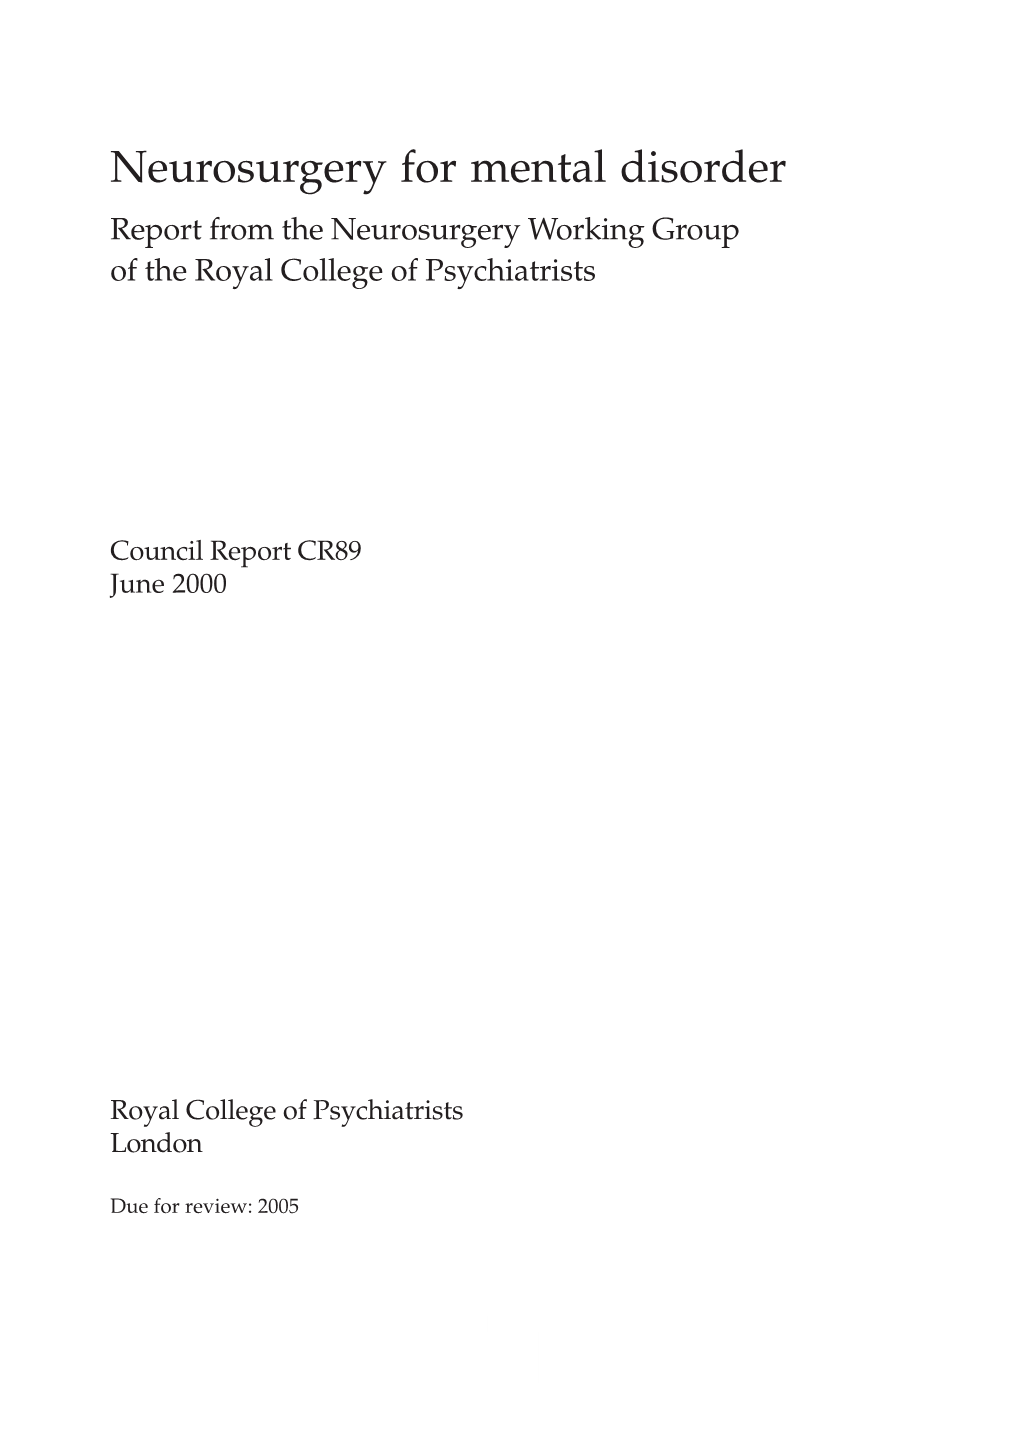 Neurosurgery for Mental Disorder Report from the Neurosurgery Working Group of the Royal College of Psychiatrists